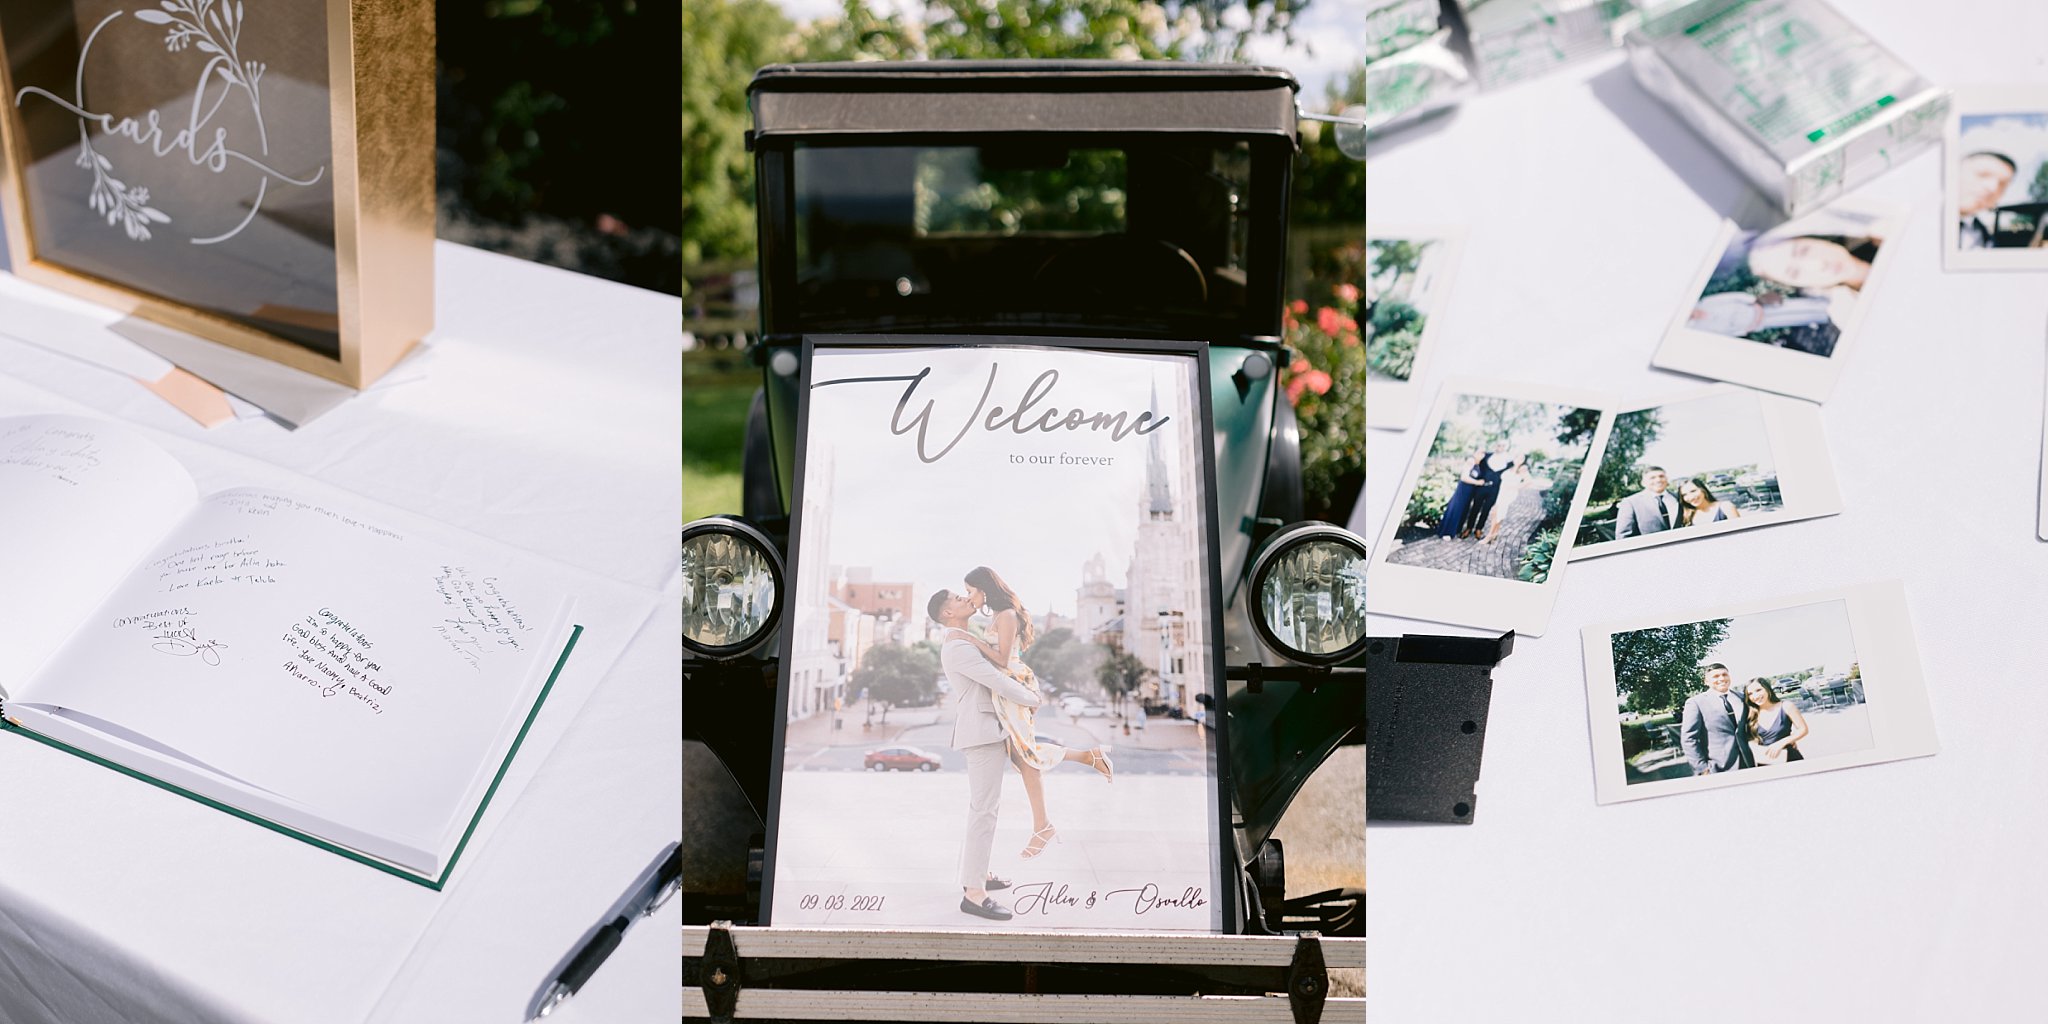 vintage car with welcome sign display for pennsylvania wedding